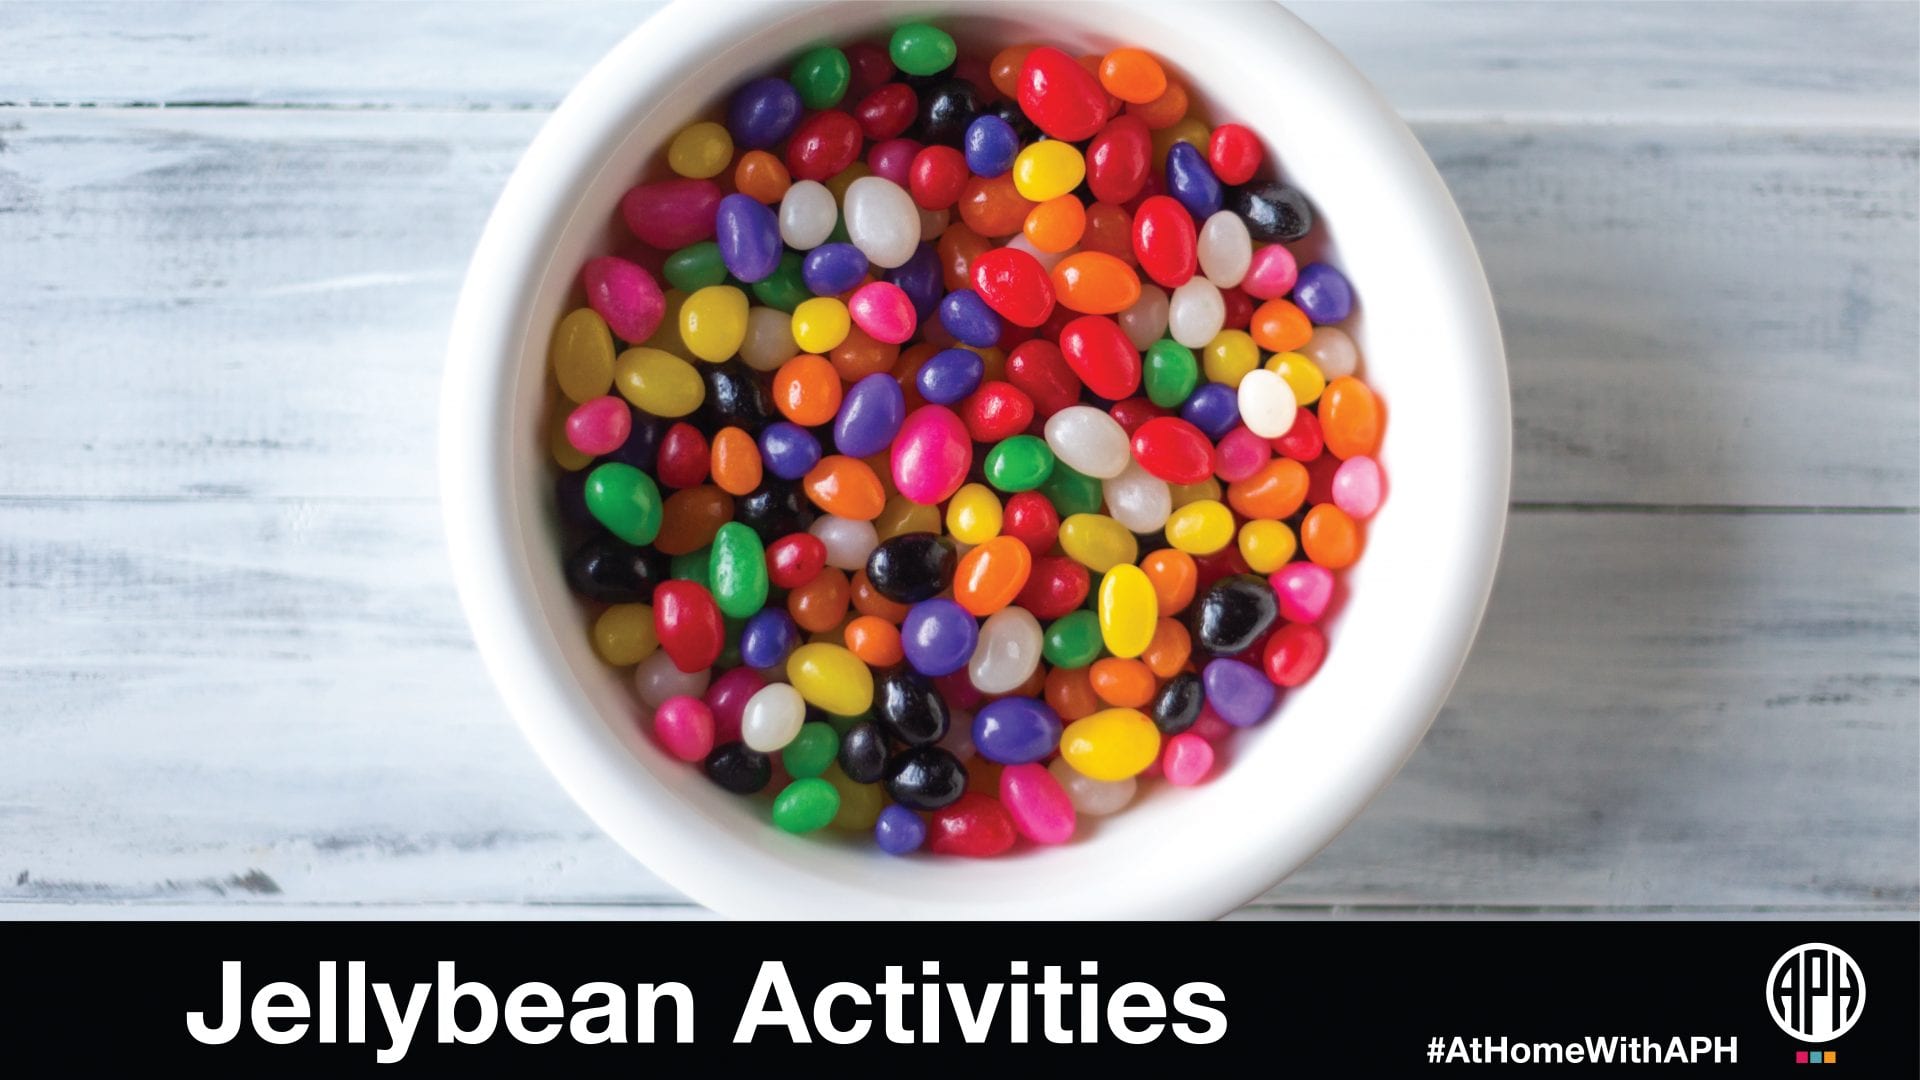 a bowl of colorful jellybeans in a bowl. text reads "Jellybean Activities #AtHomeWithAPH"